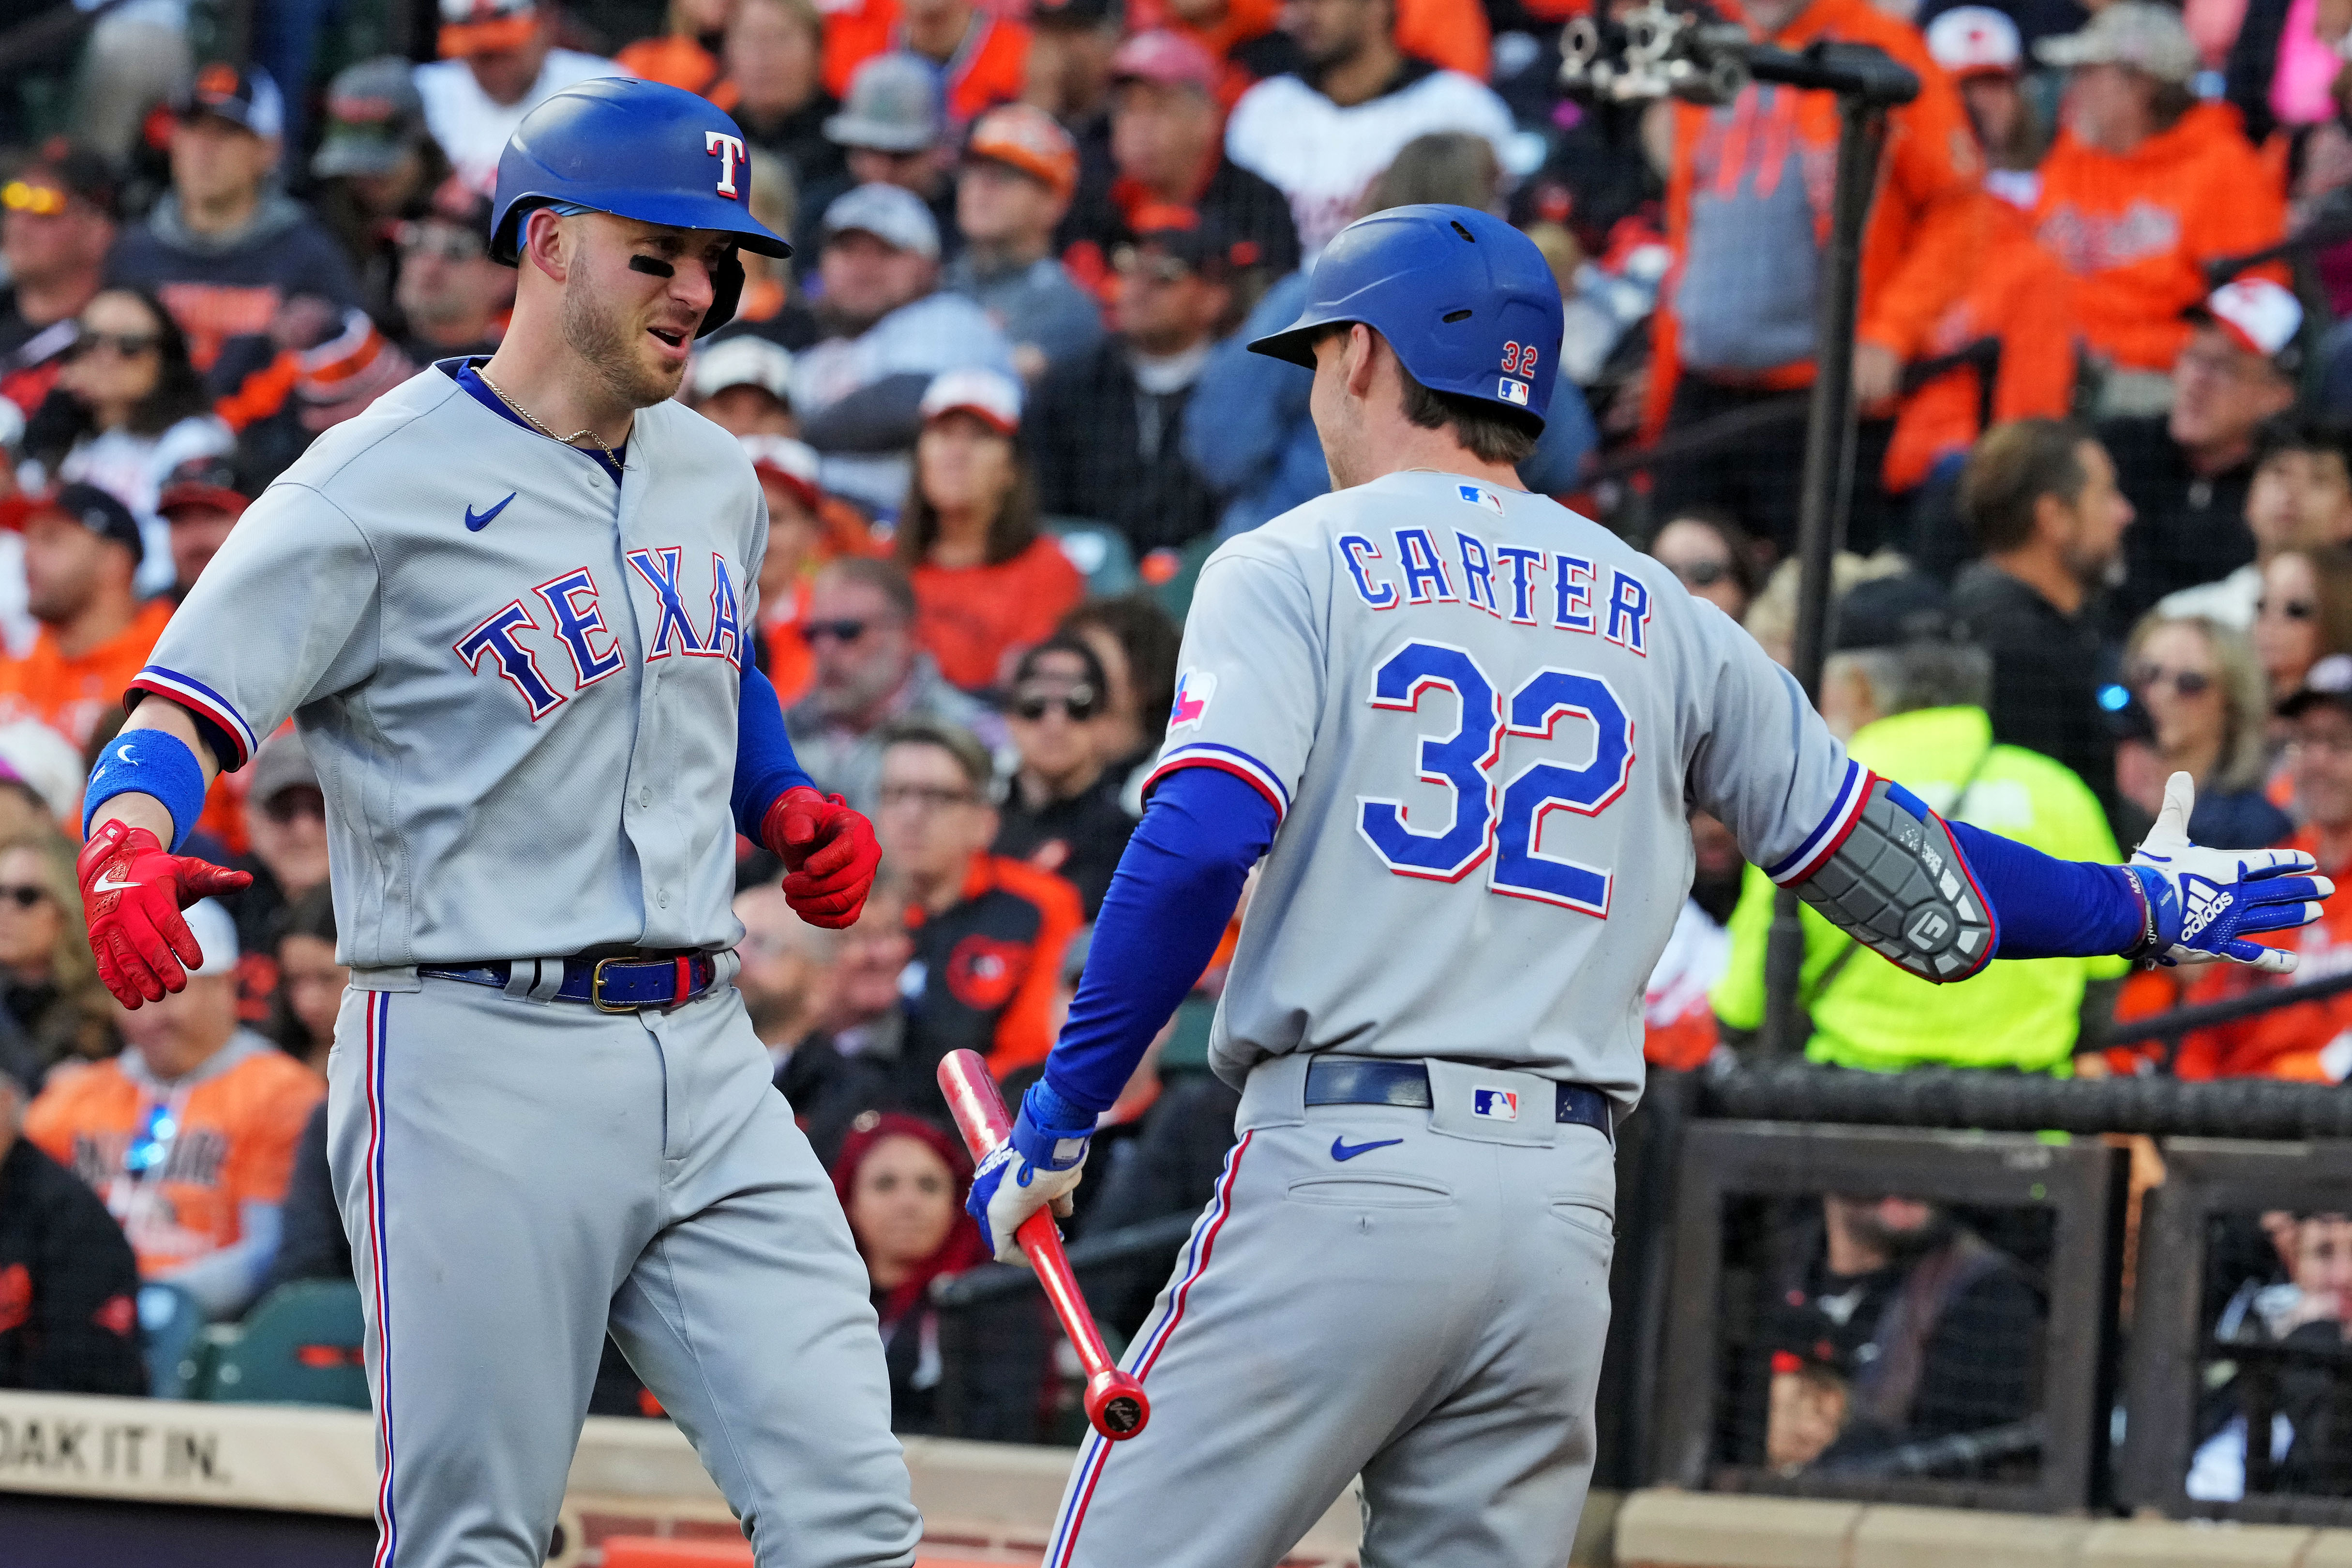 Texas Rangers designated hitter Mitch Garver celebrates with Evan Carter after hitting a grand slam in the third inning against the Baltimore Orioles during Game 2 of the ALDS at Camden Yards.